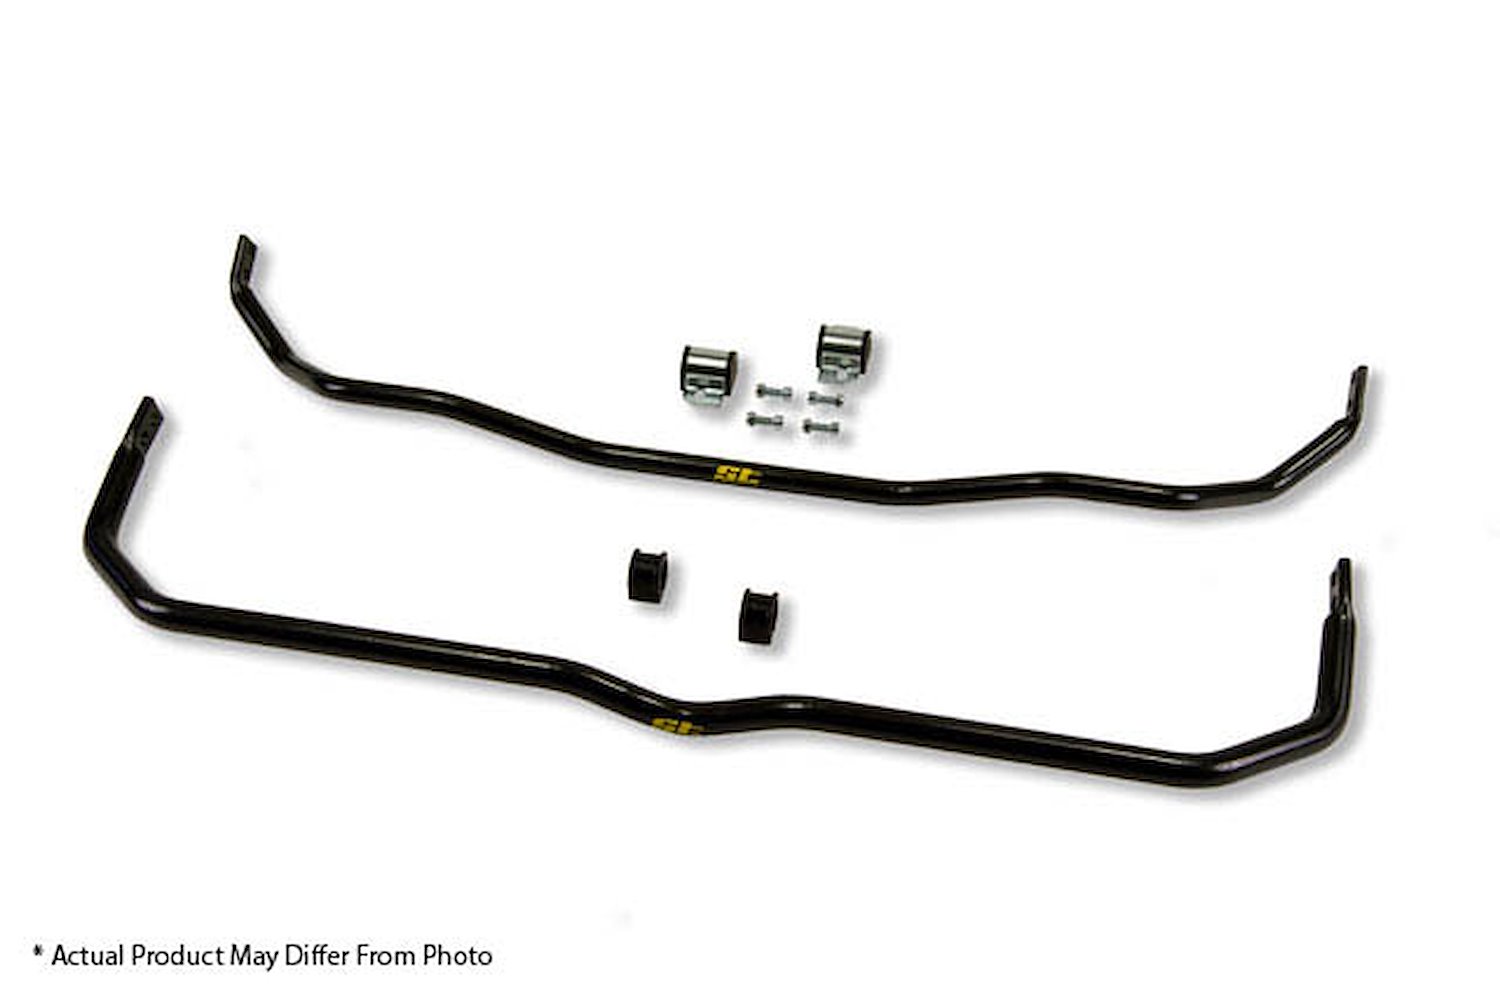 52306 Anti-Swaybar Sets for 95-99 BMW E36 M3